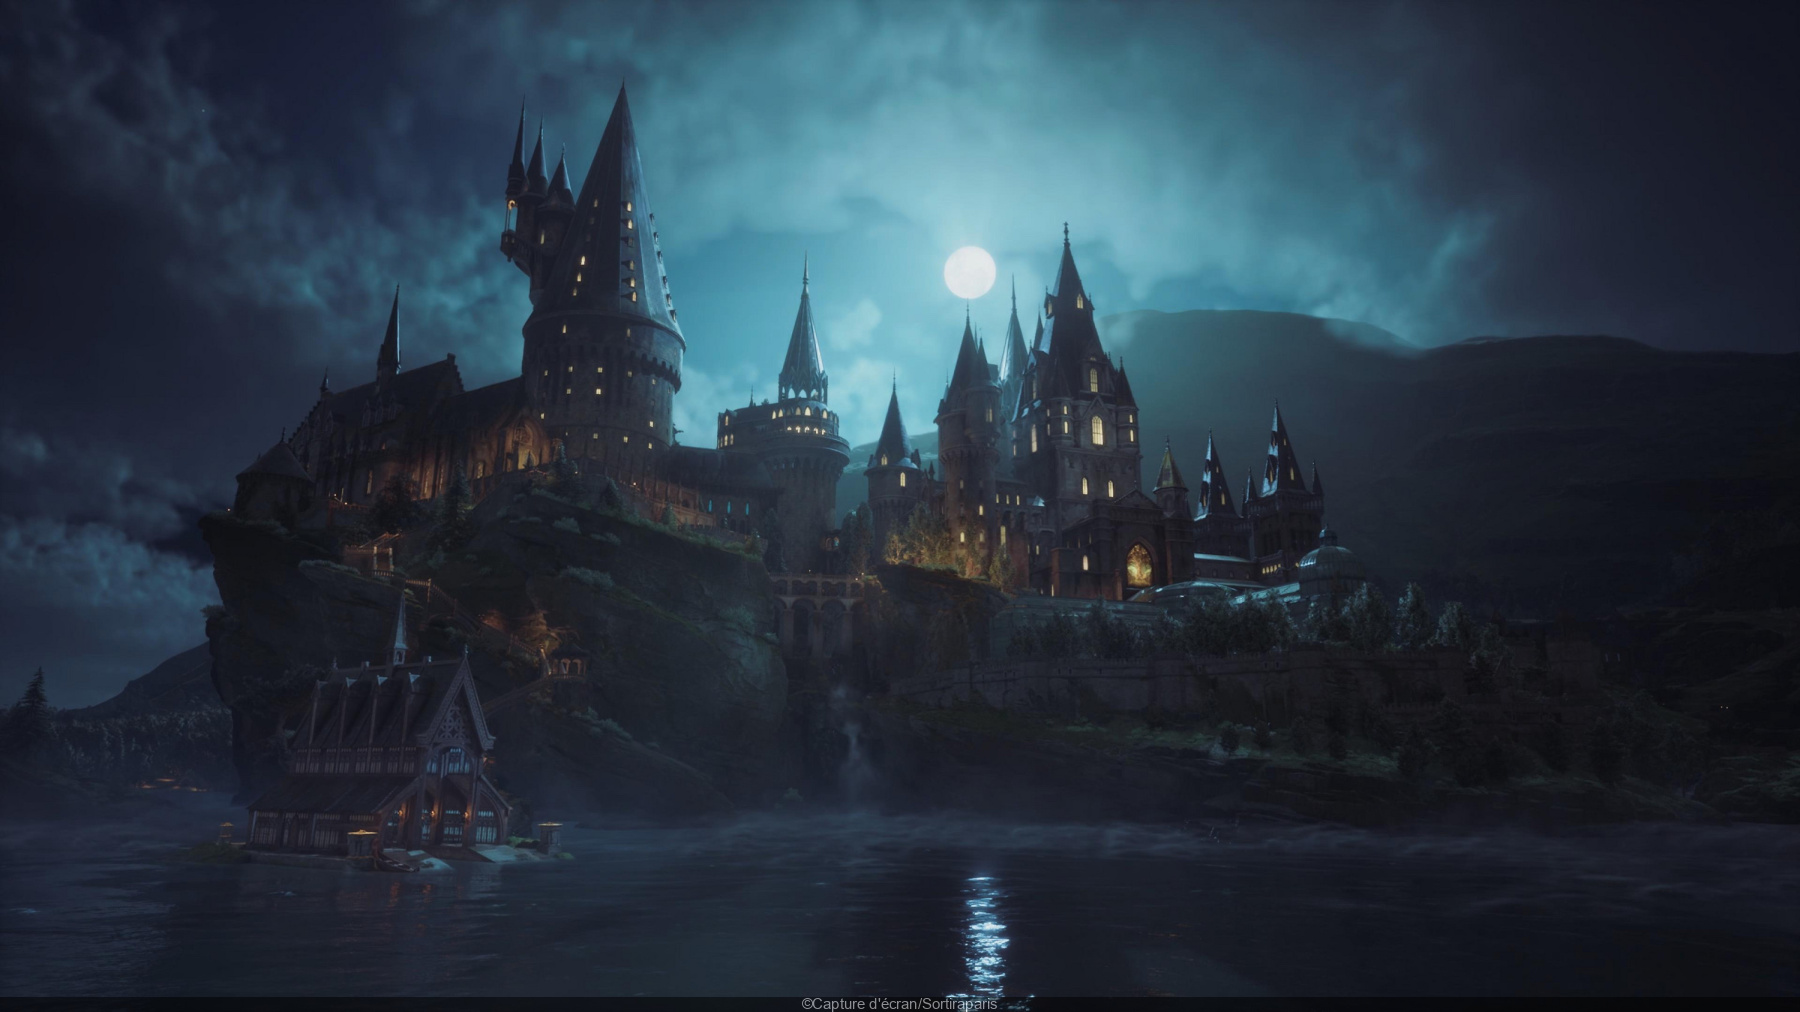 Hogwarts Legacy hits low price of $29 among today's Black Friday